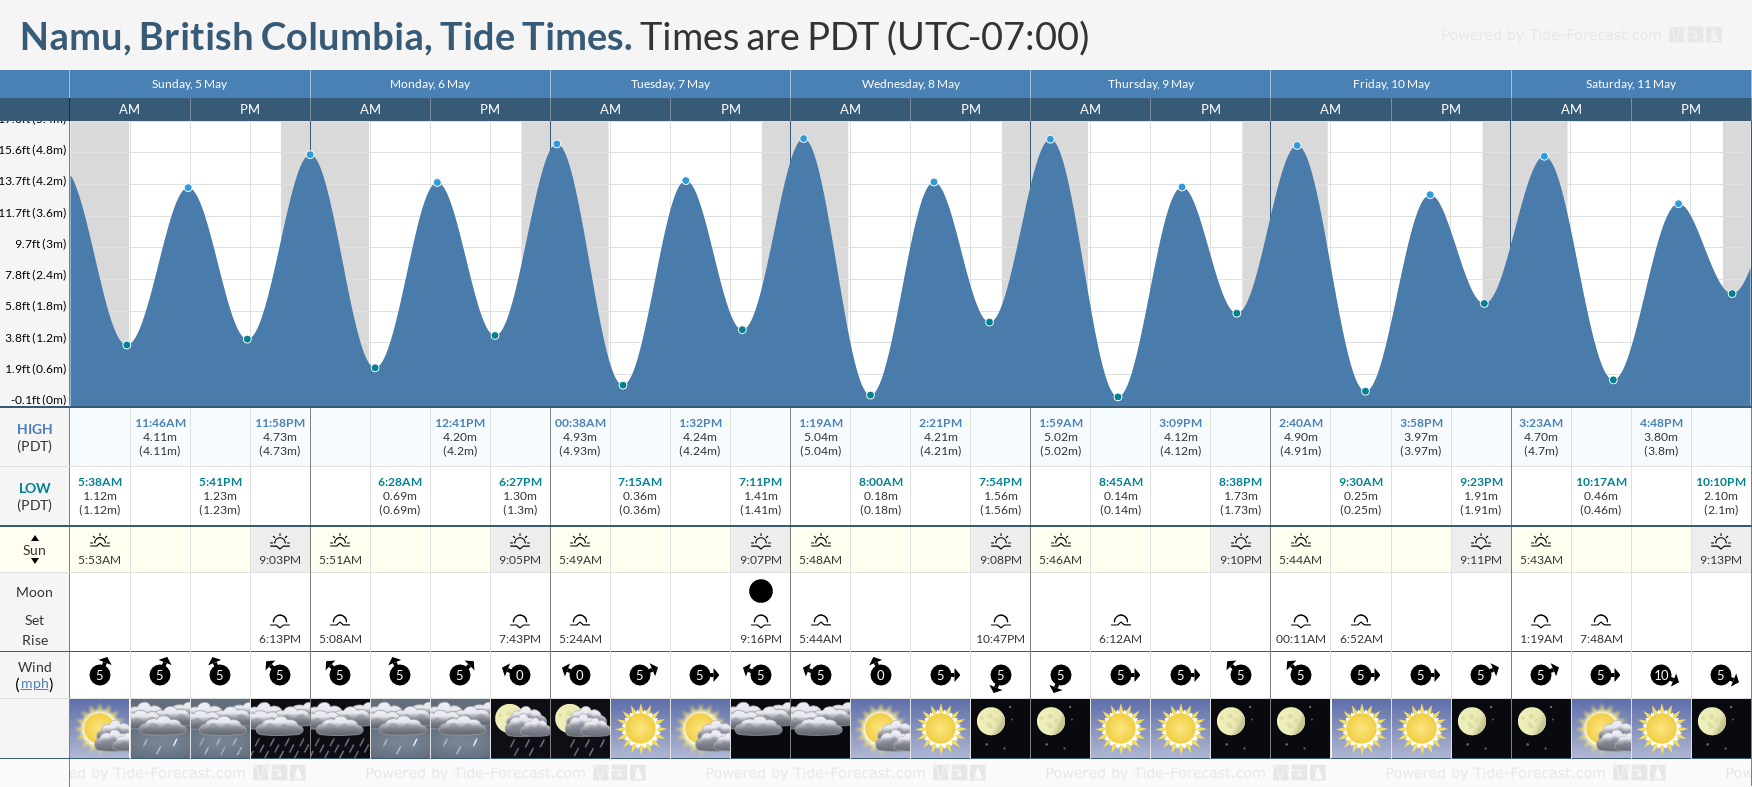 Namu, British Columbia Tide Chart including high and low tide tide times for the next 7 days